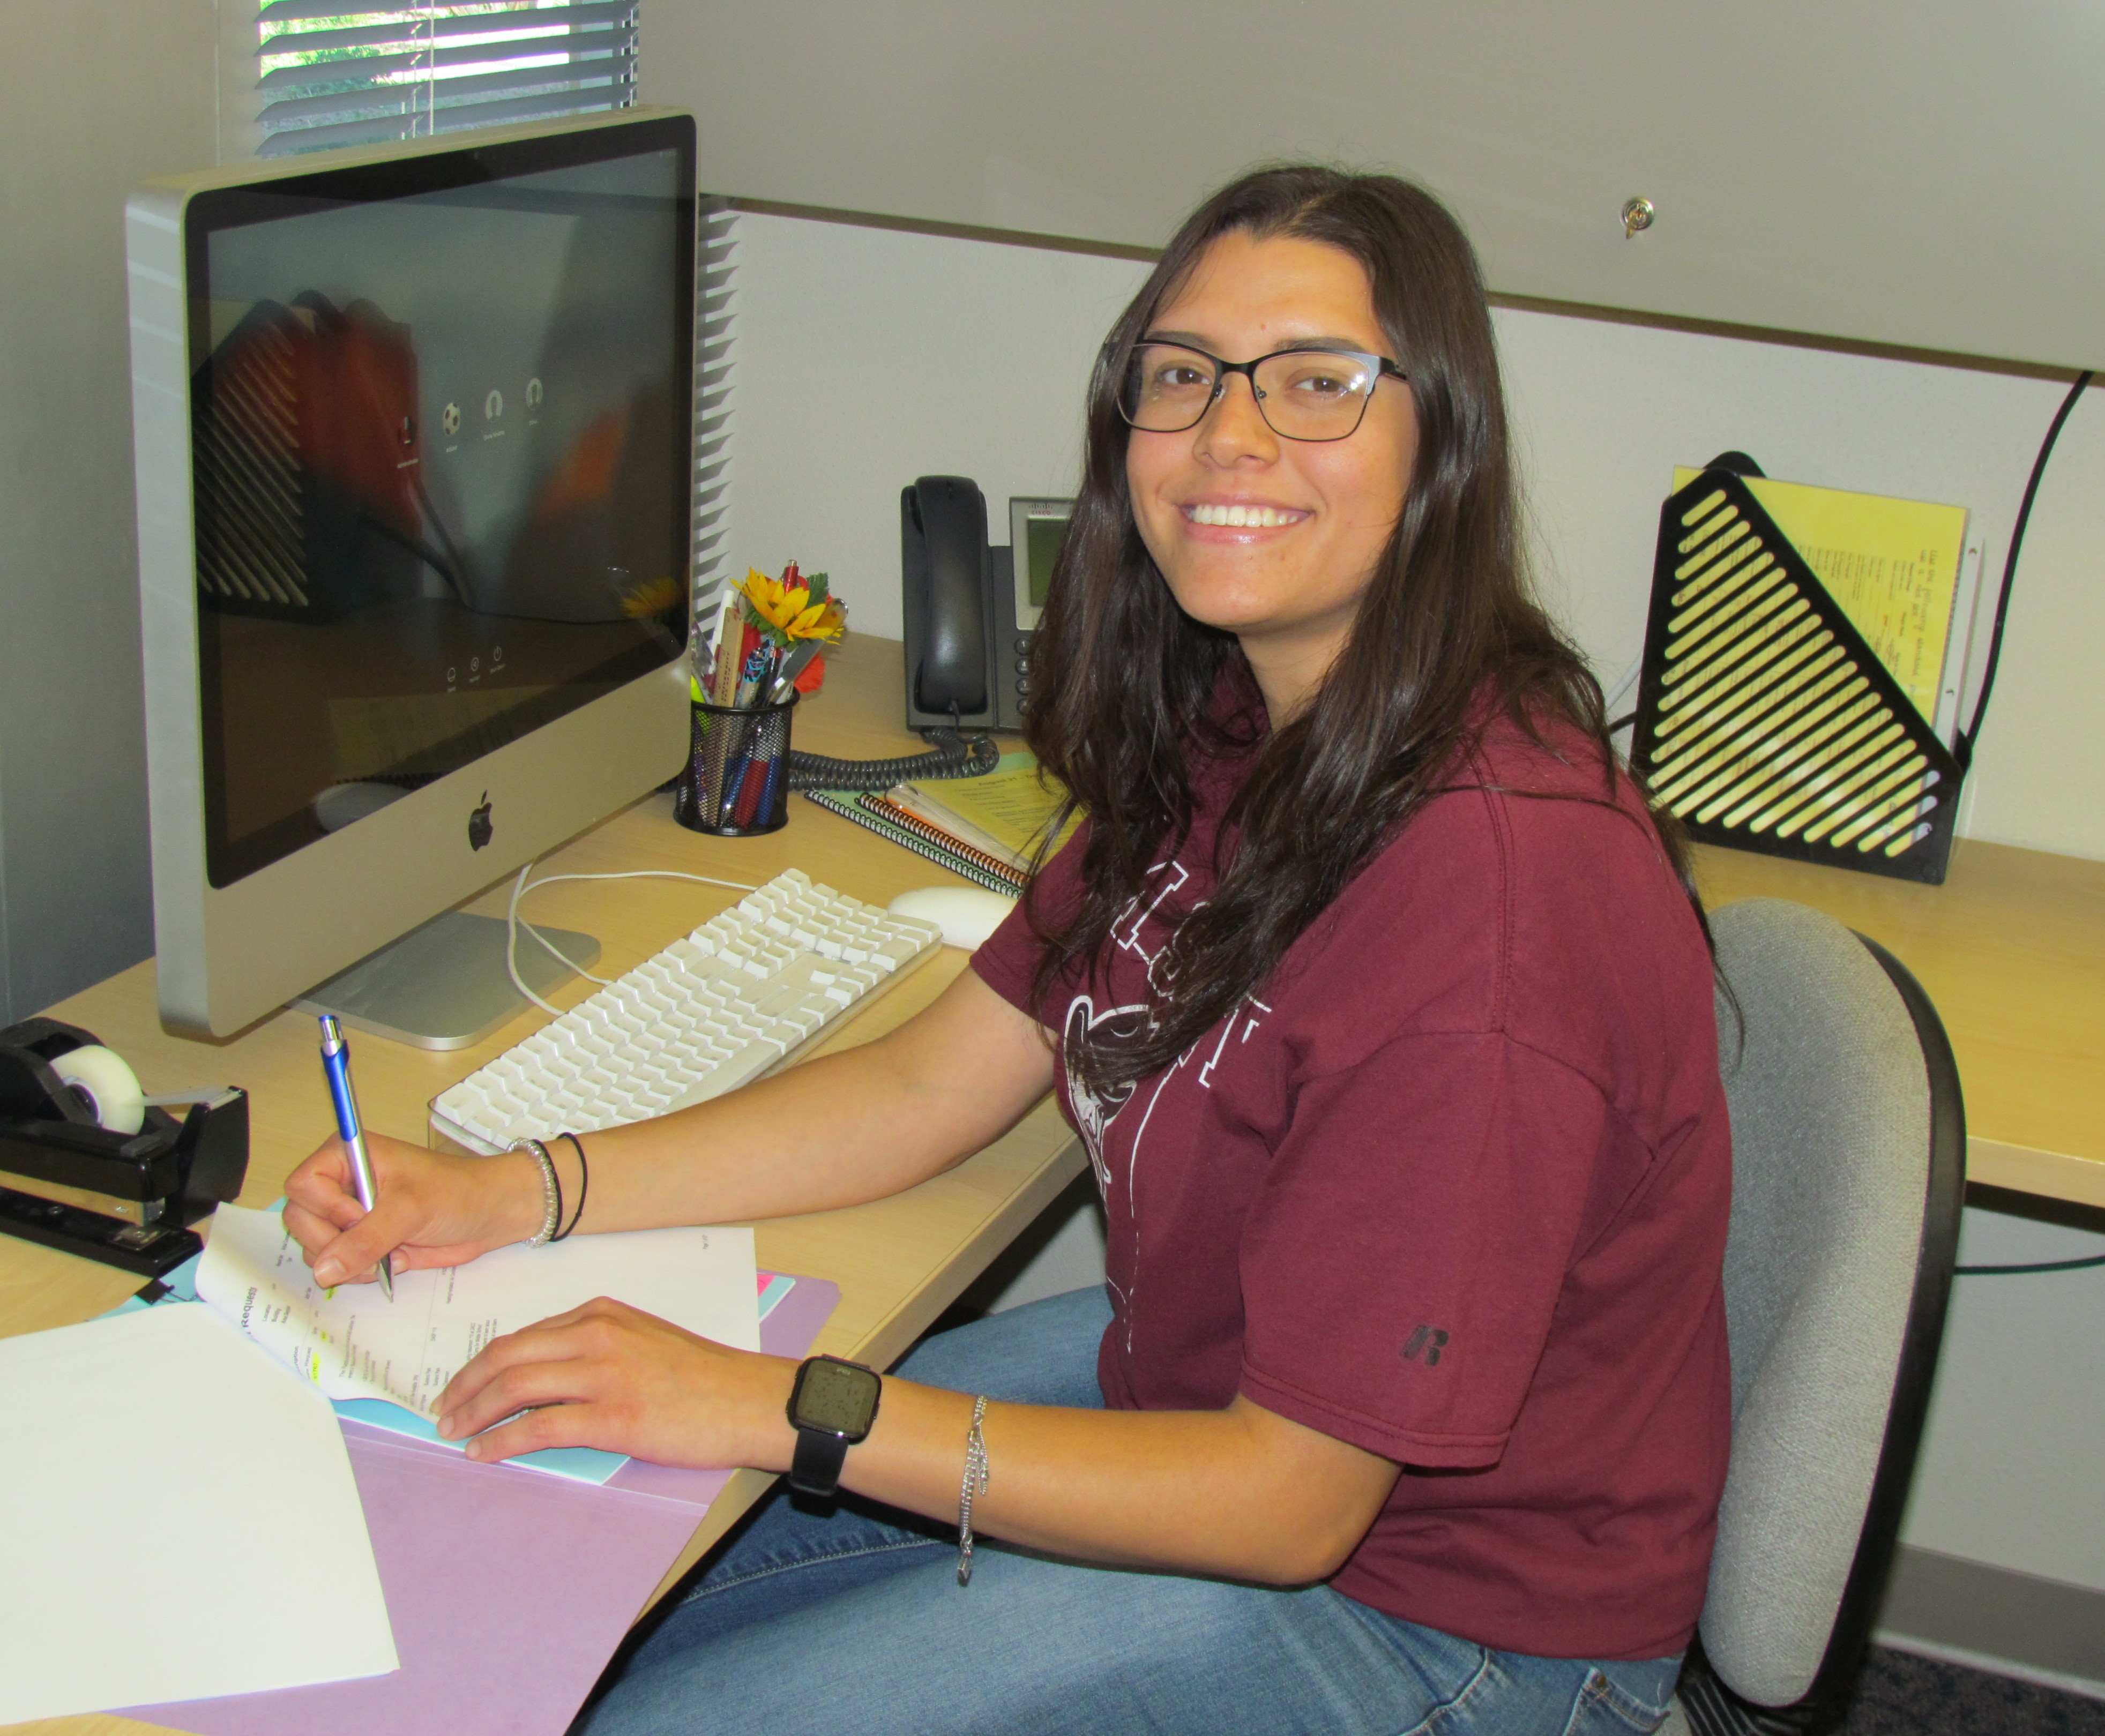 An NMSU Aggie breaks from filling out a document on her desk to give a smile.